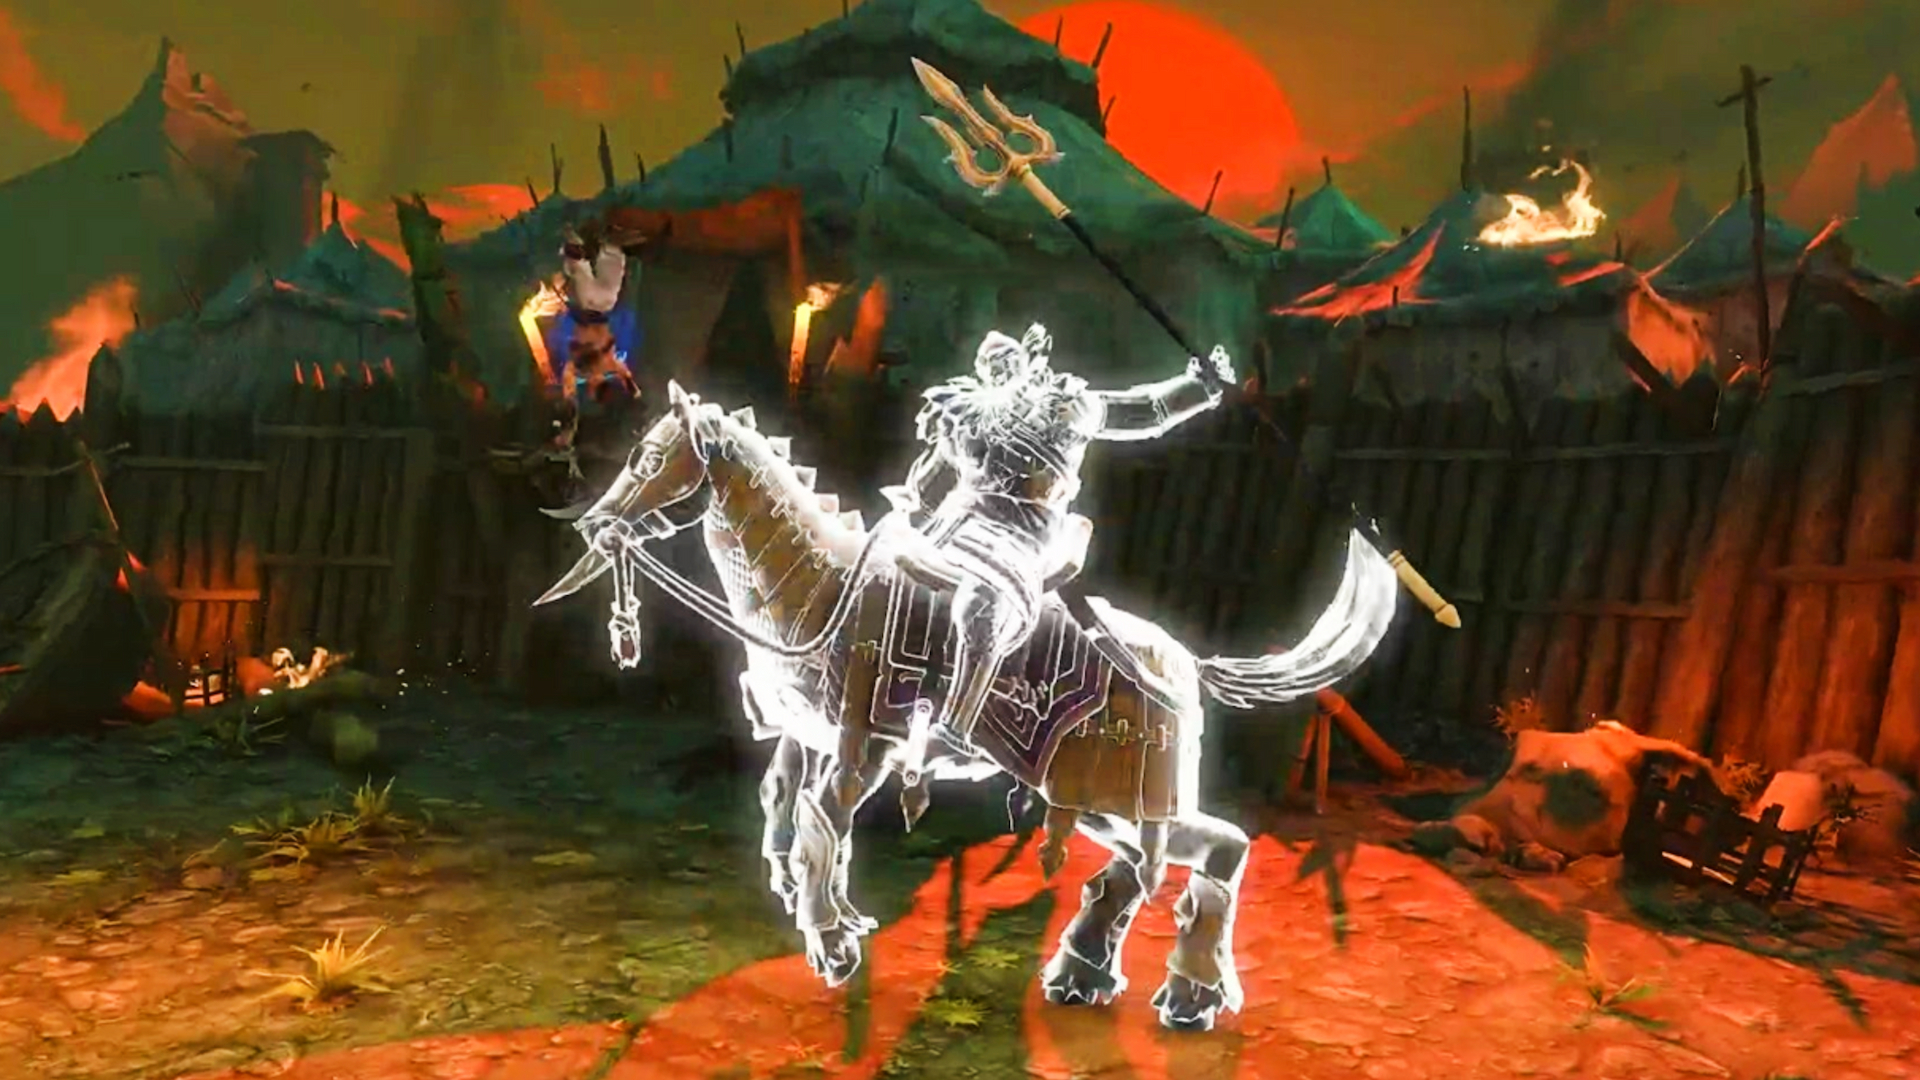 A screenshot of a white glowing horse from the upcoming Prince of Persia game